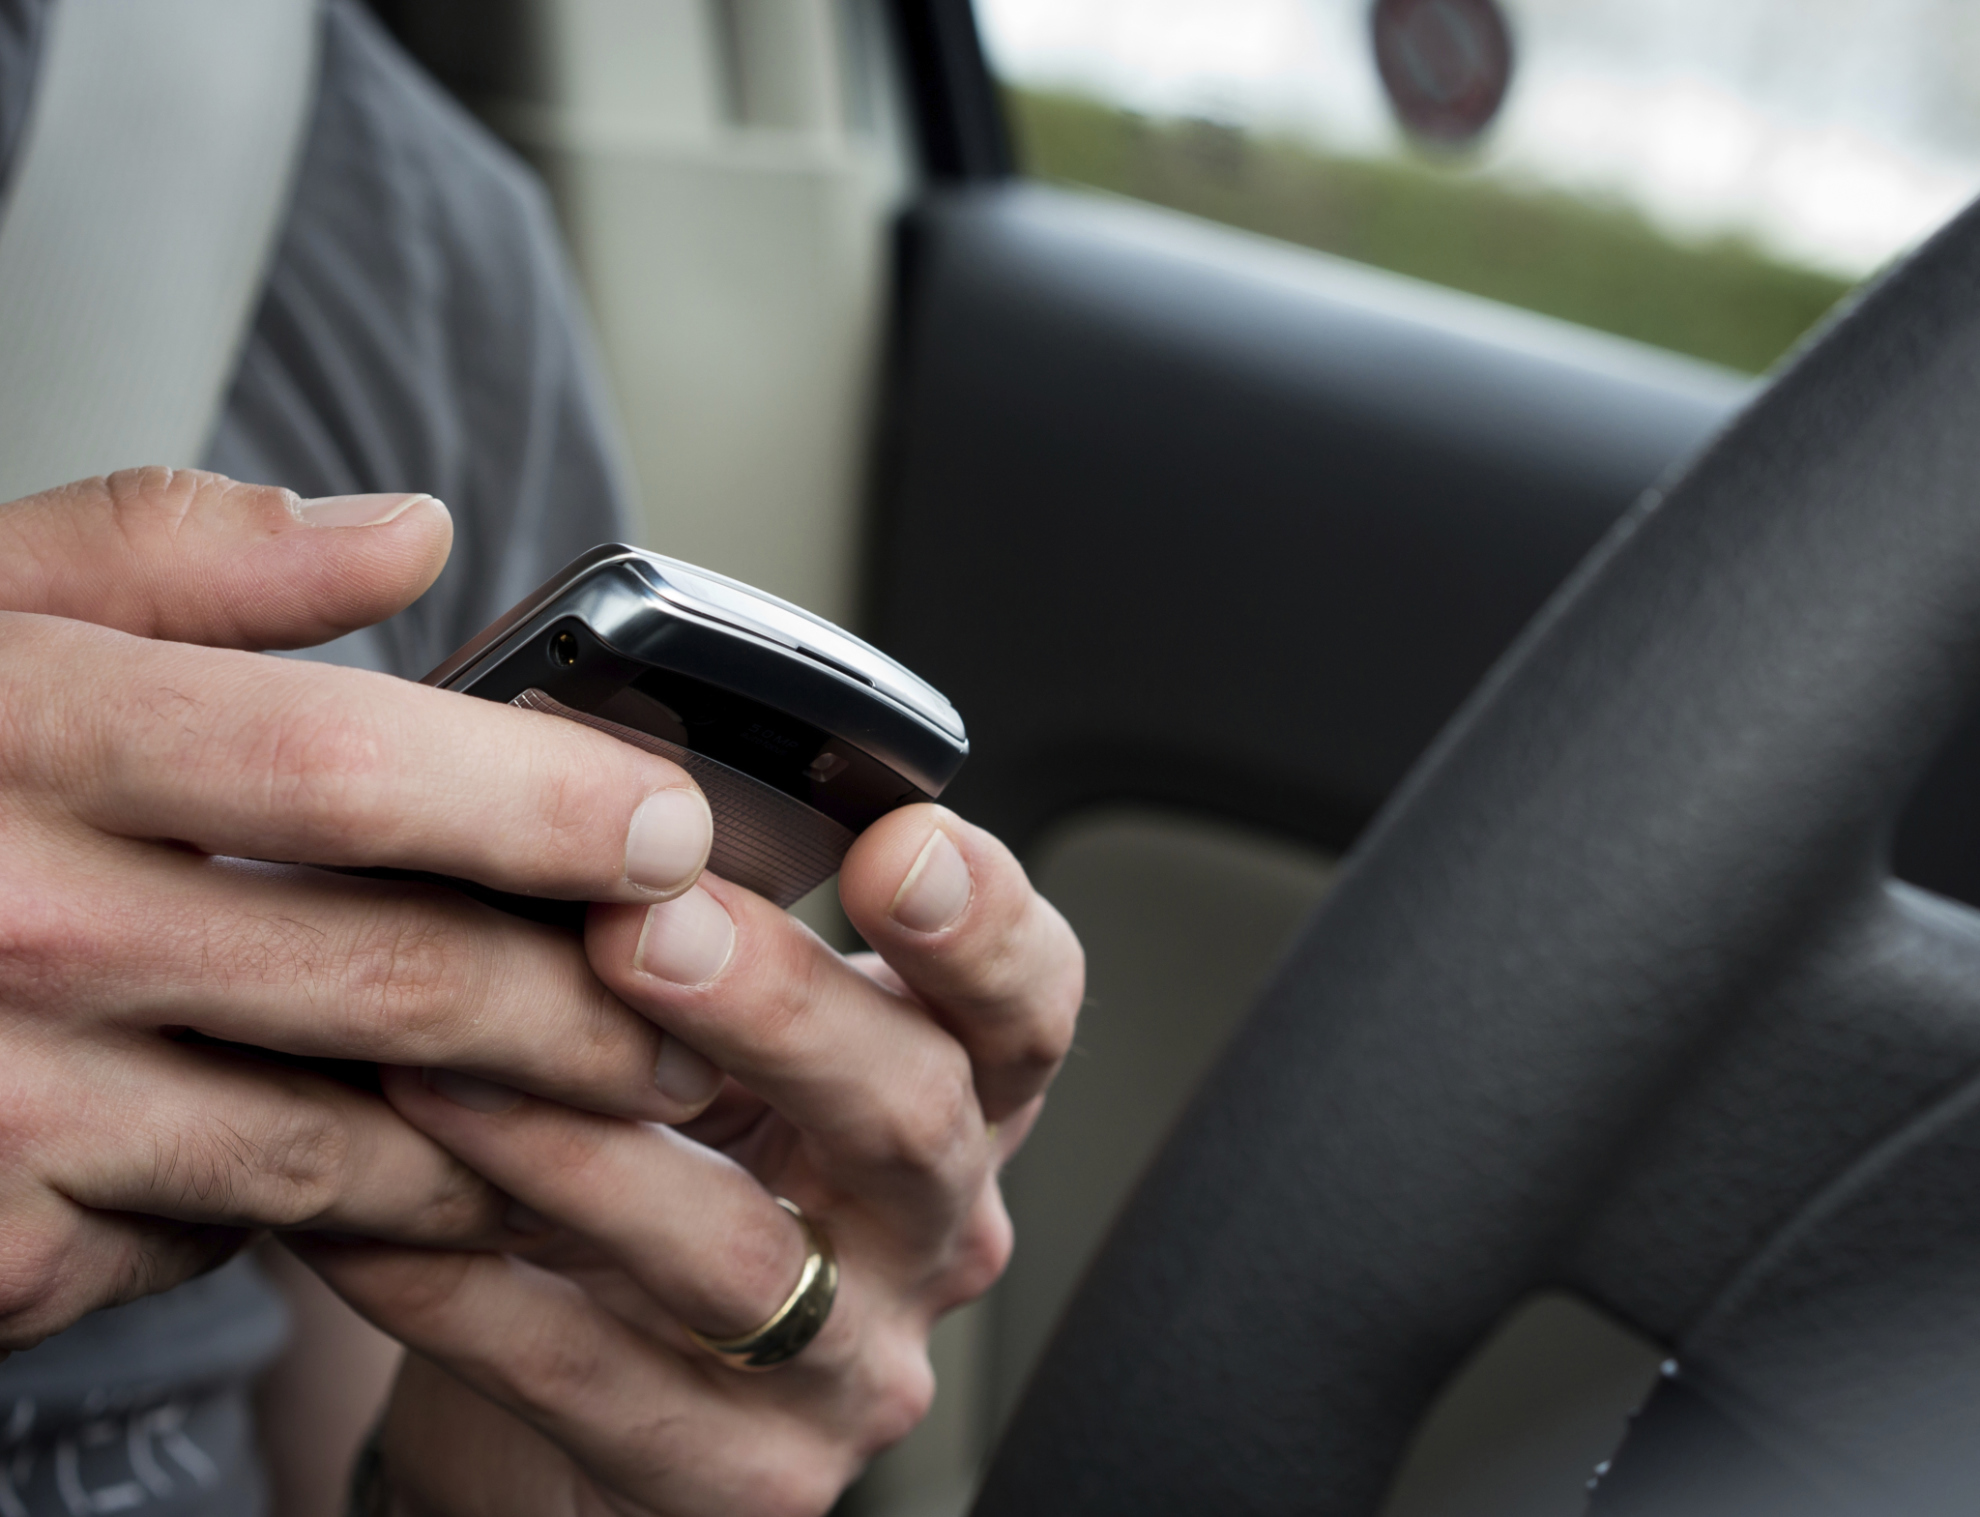 State laws vary for cellphone use behind the wheel